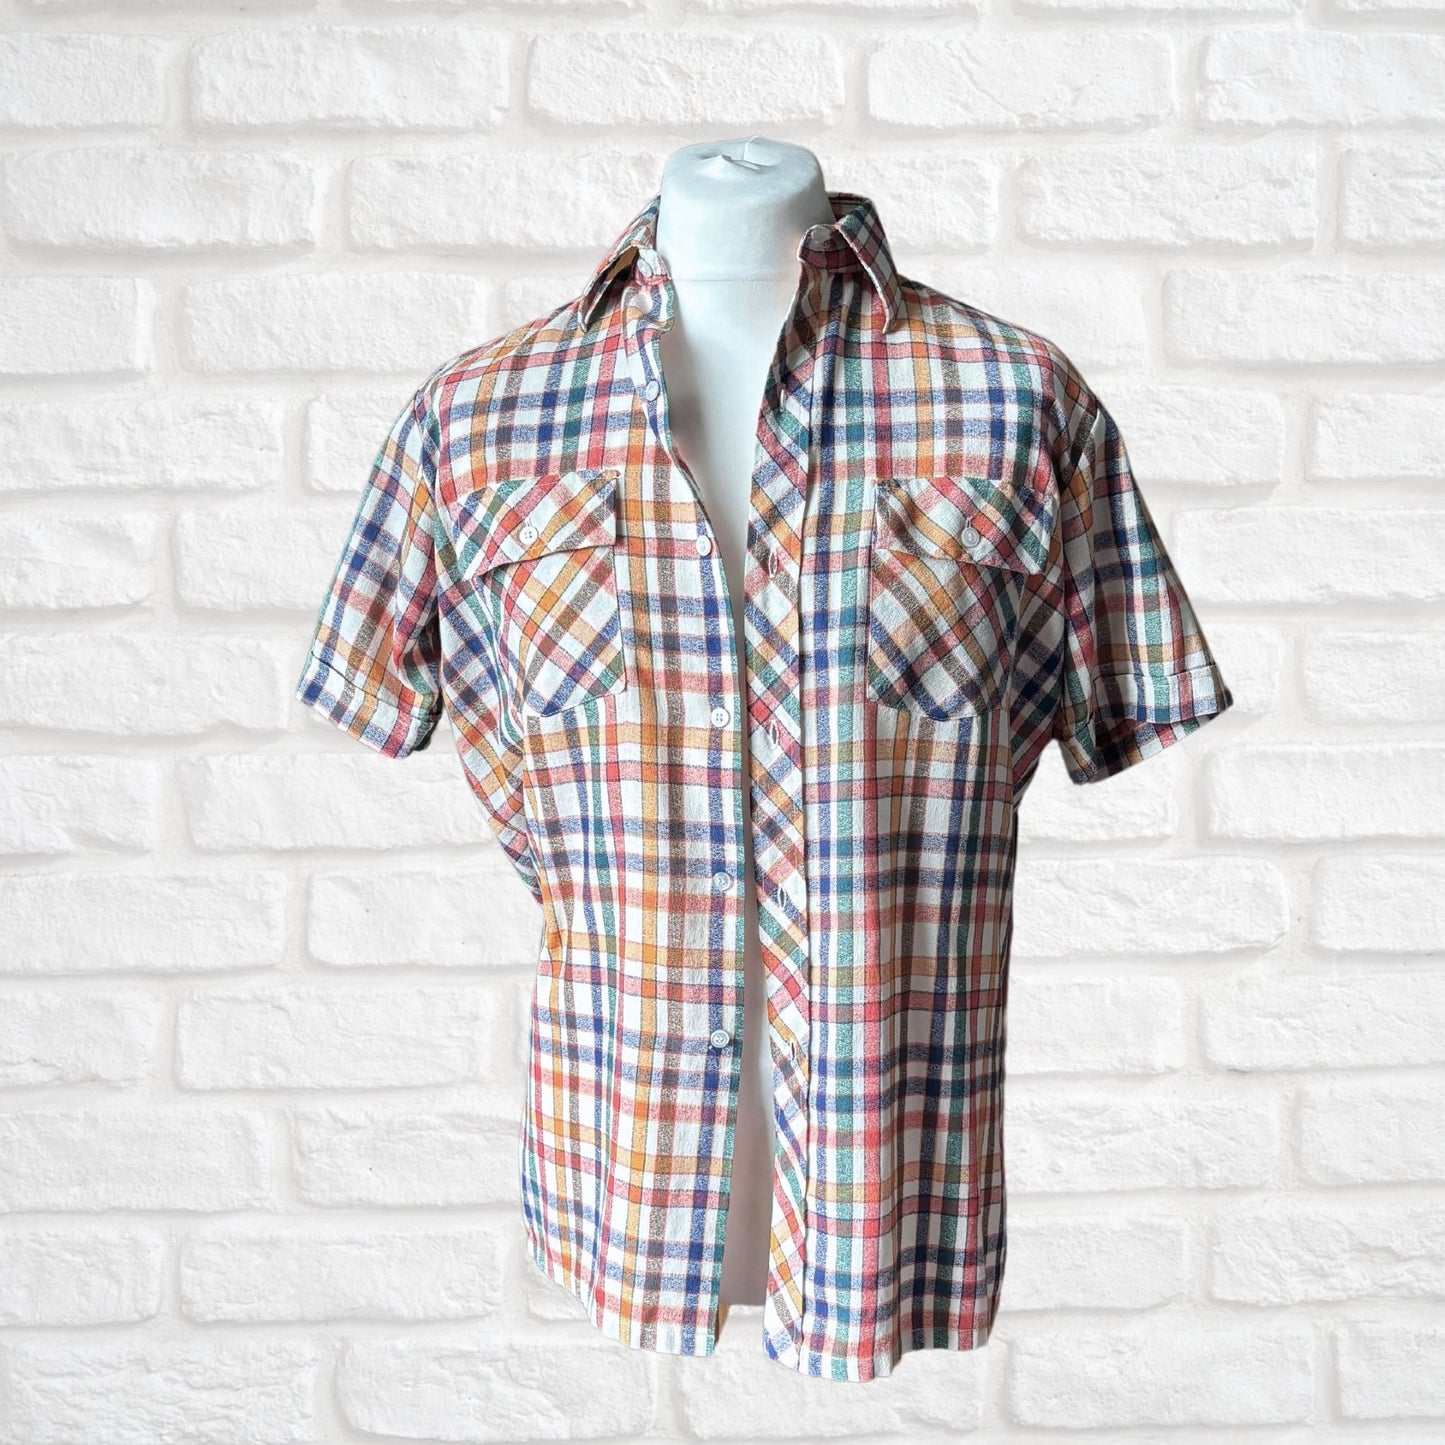 White, Red, Green, Blue and Orange Checked Vintage Short Sleeved Shirt Approx UK size L (men) 16-18 (women )